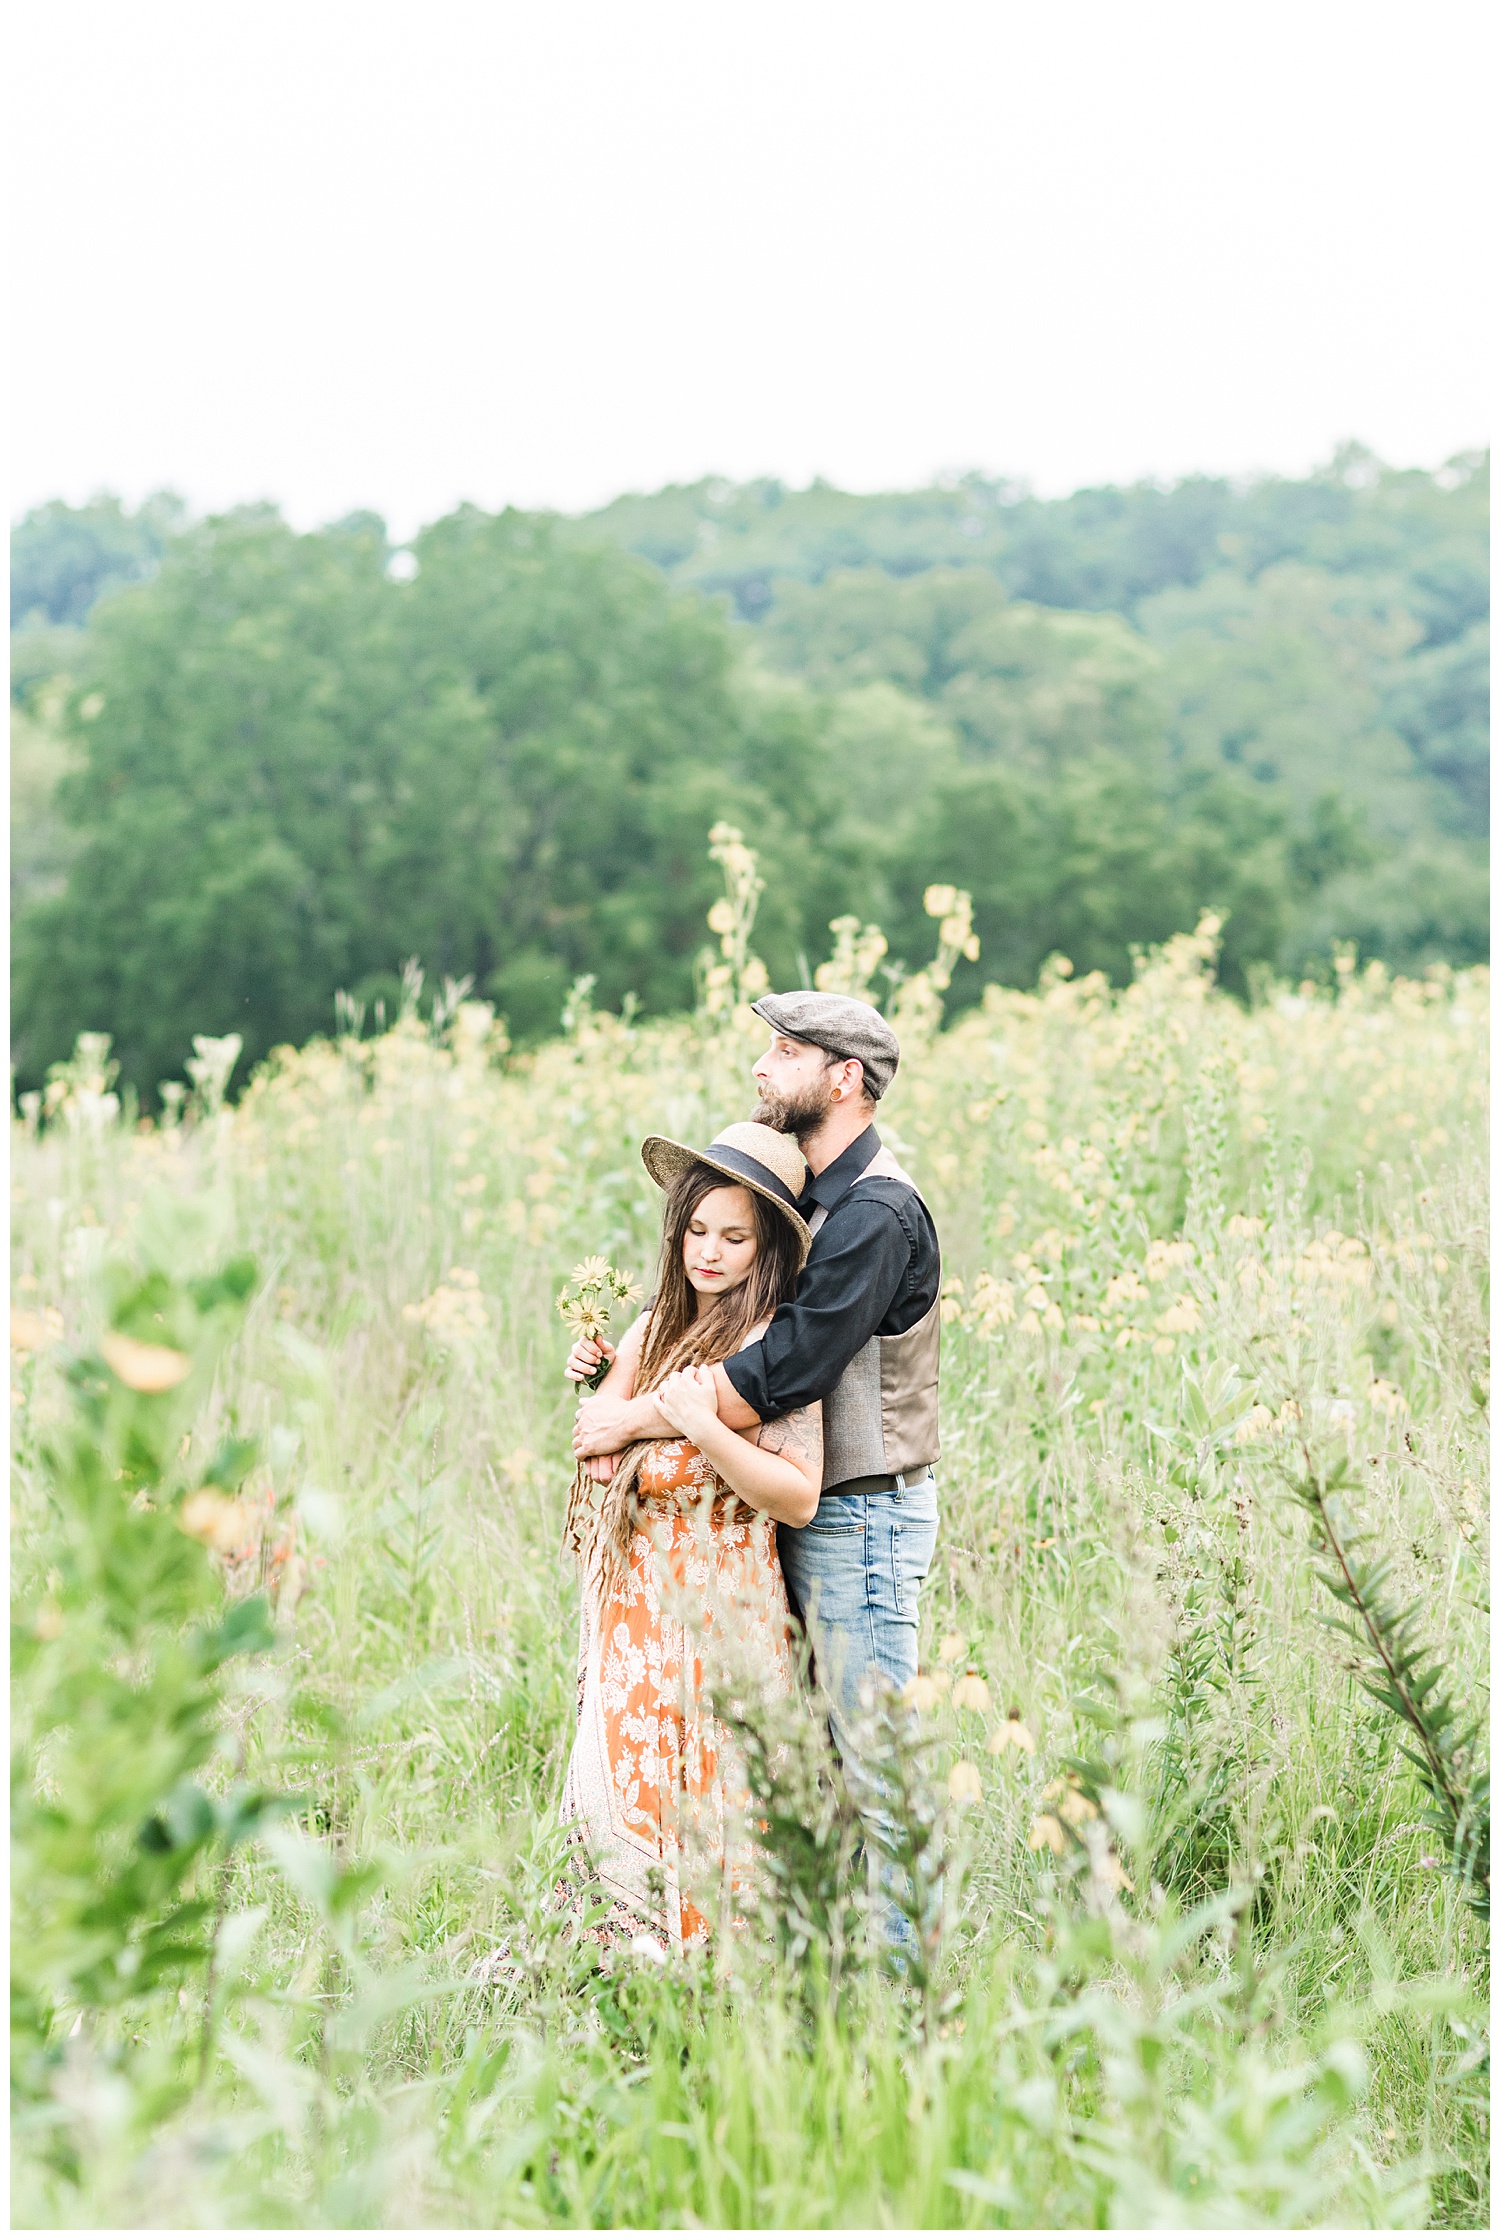 Katlyn and Brad embrace in the middle of a wildflower field at Thomas Mitchell Park | CB Studio